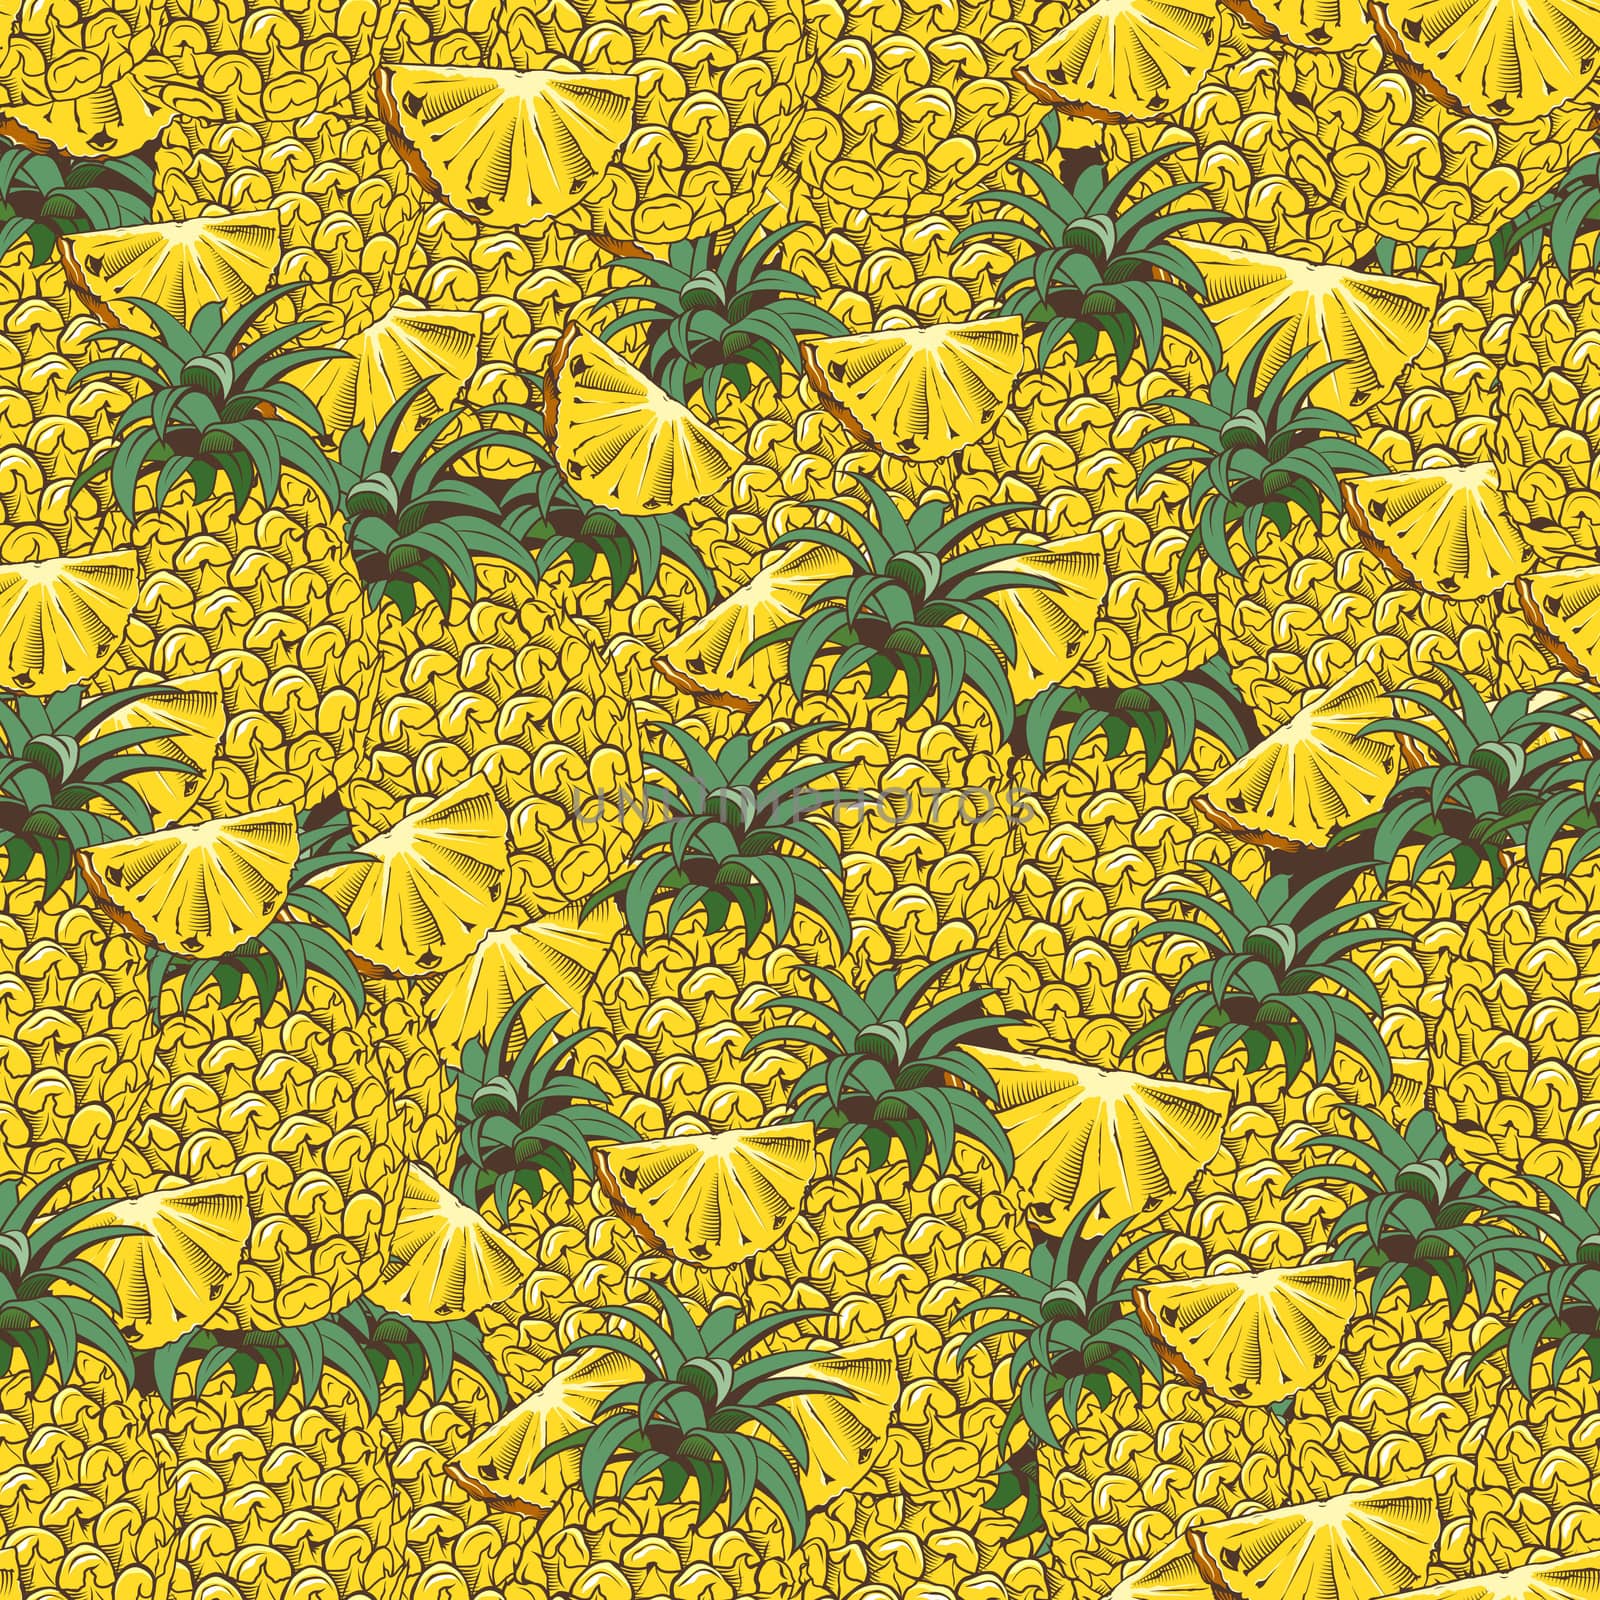 Vintage Pineapple Seamless Pattern by ConceptCafe